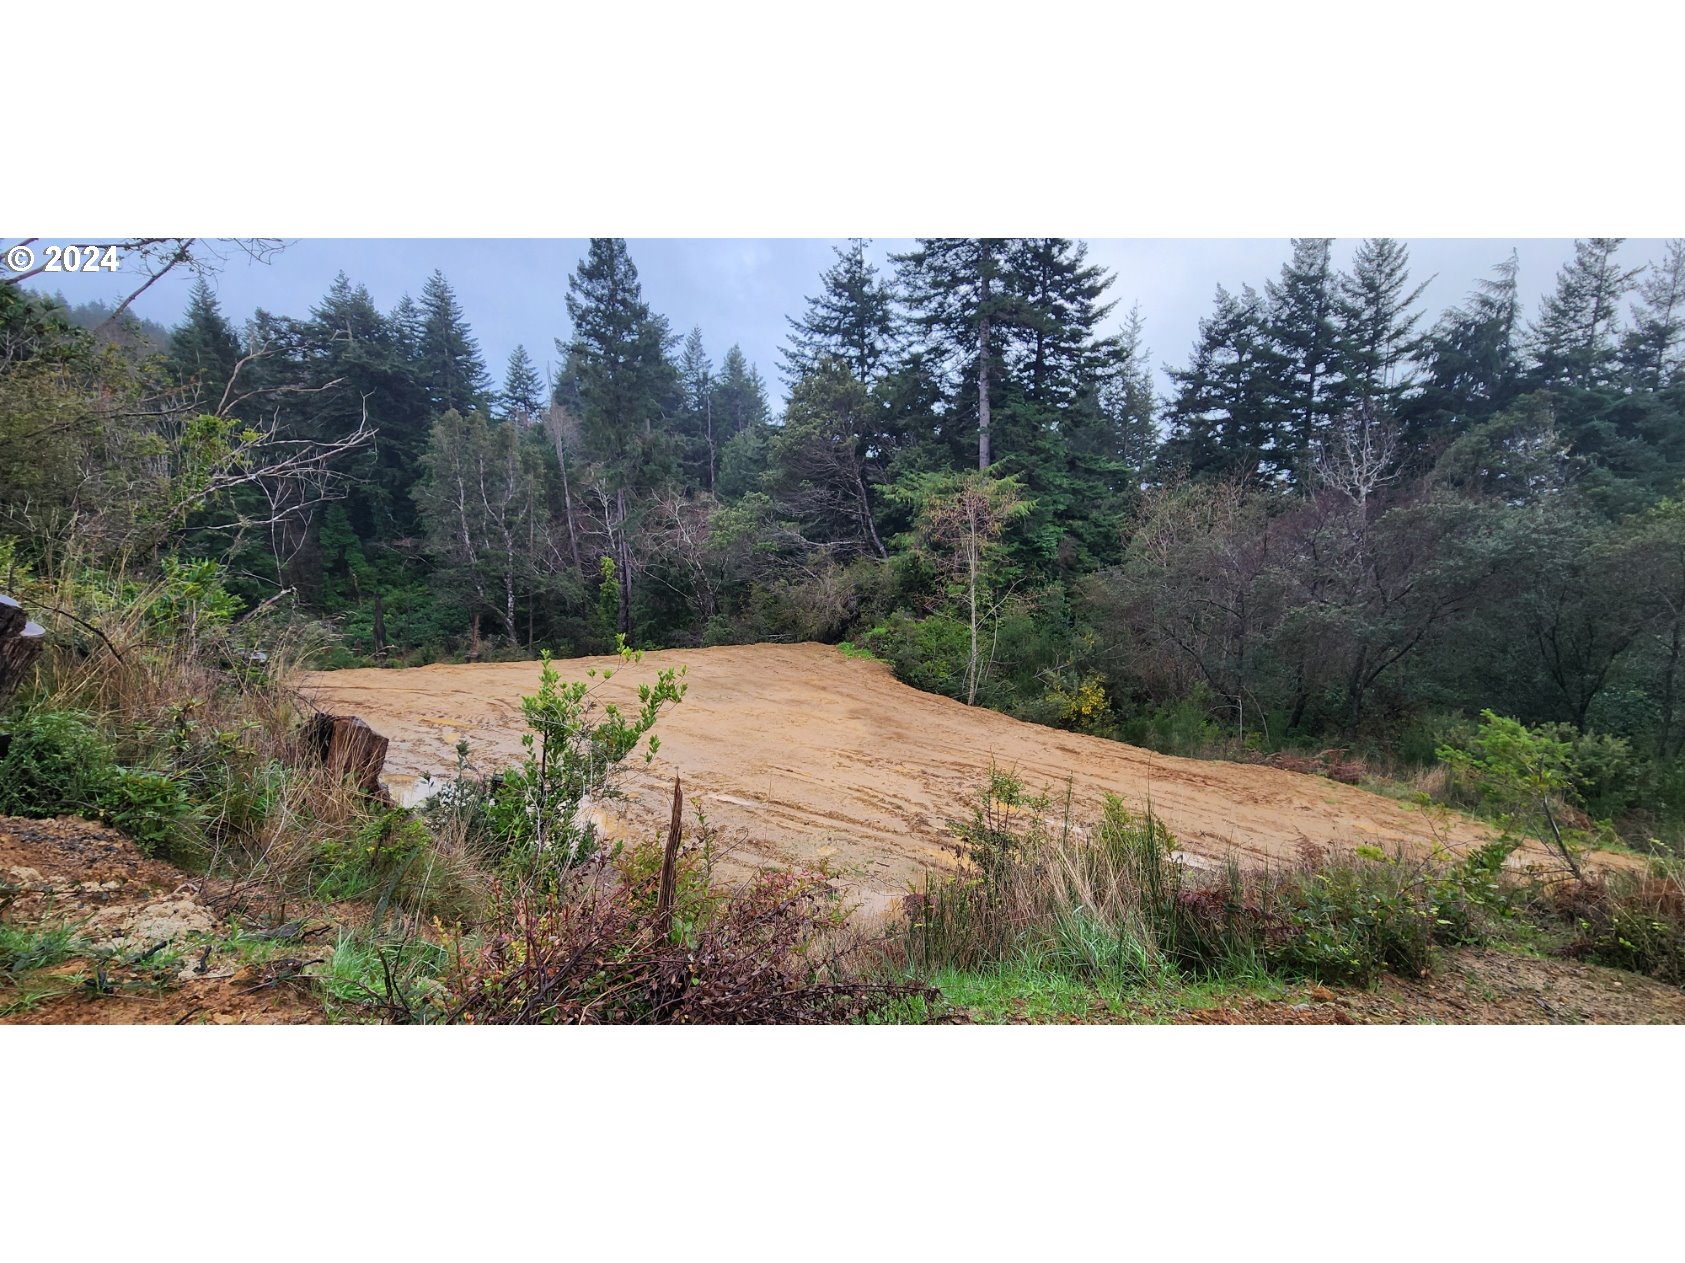 24495731, 2050 Deady St, Port Orford, OR 97465, #24495731